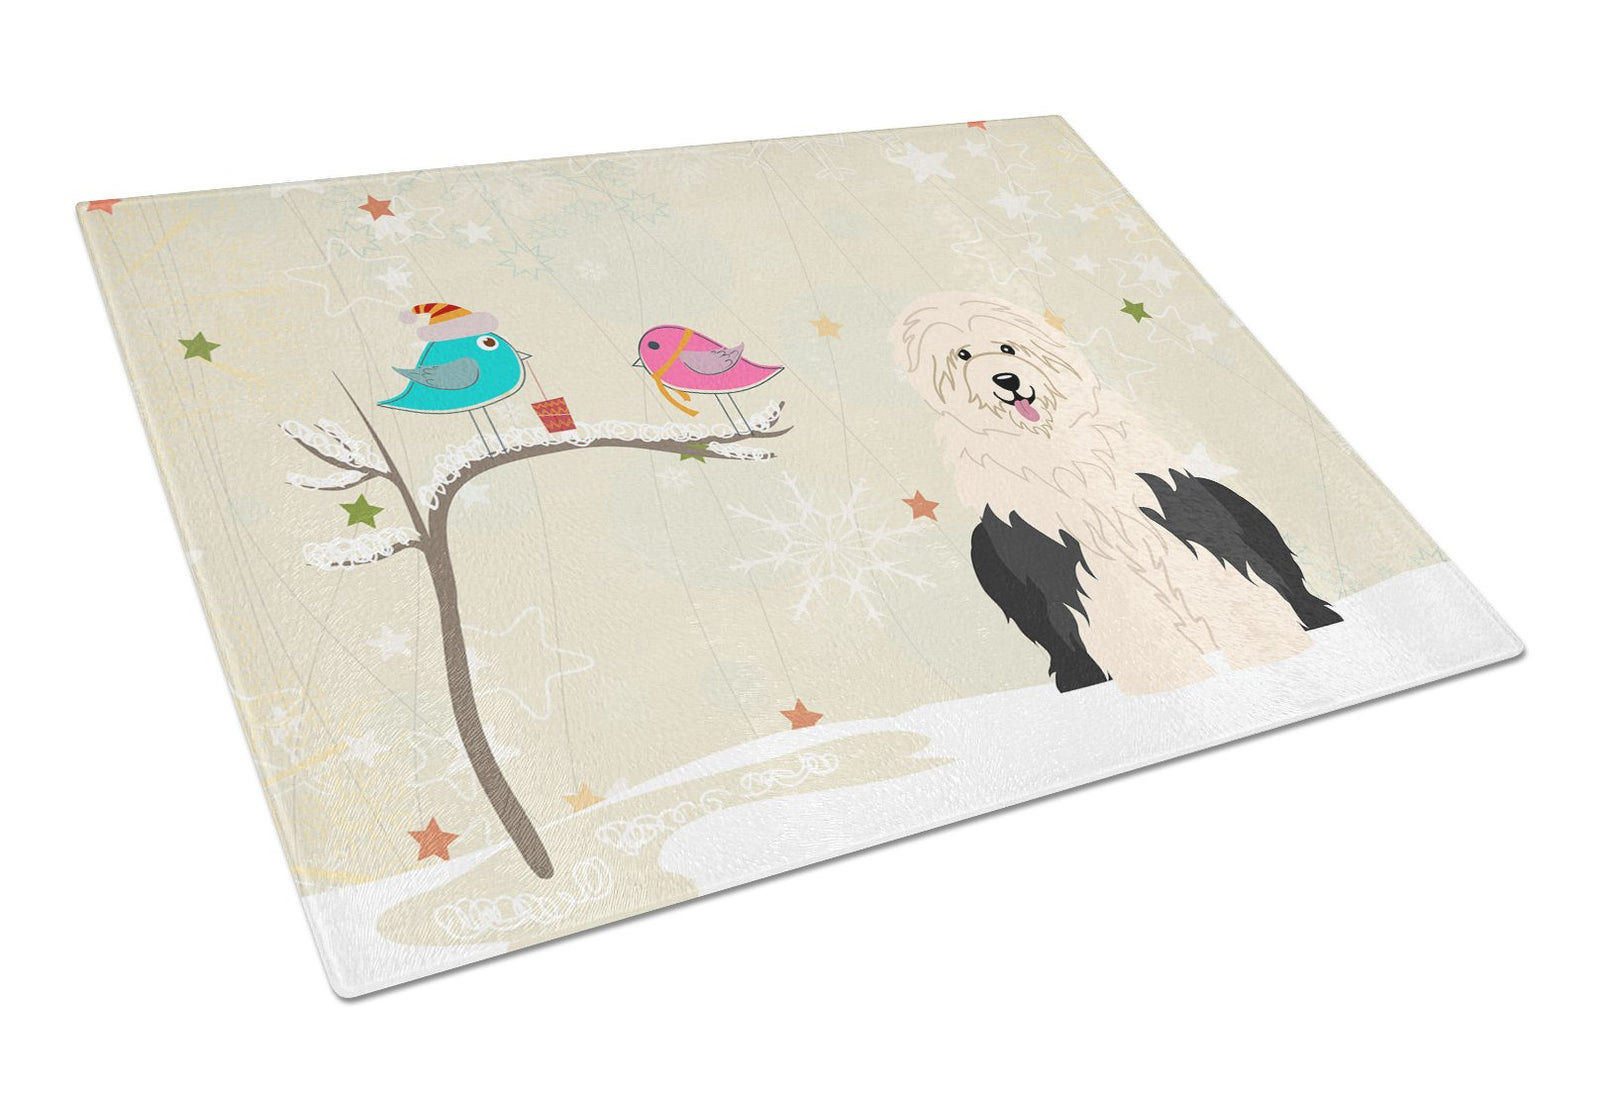 Christmas Presents between Friends Old English Sheepdog Glass Cutting Board Large BB2568LCB by Caroline's Treasures